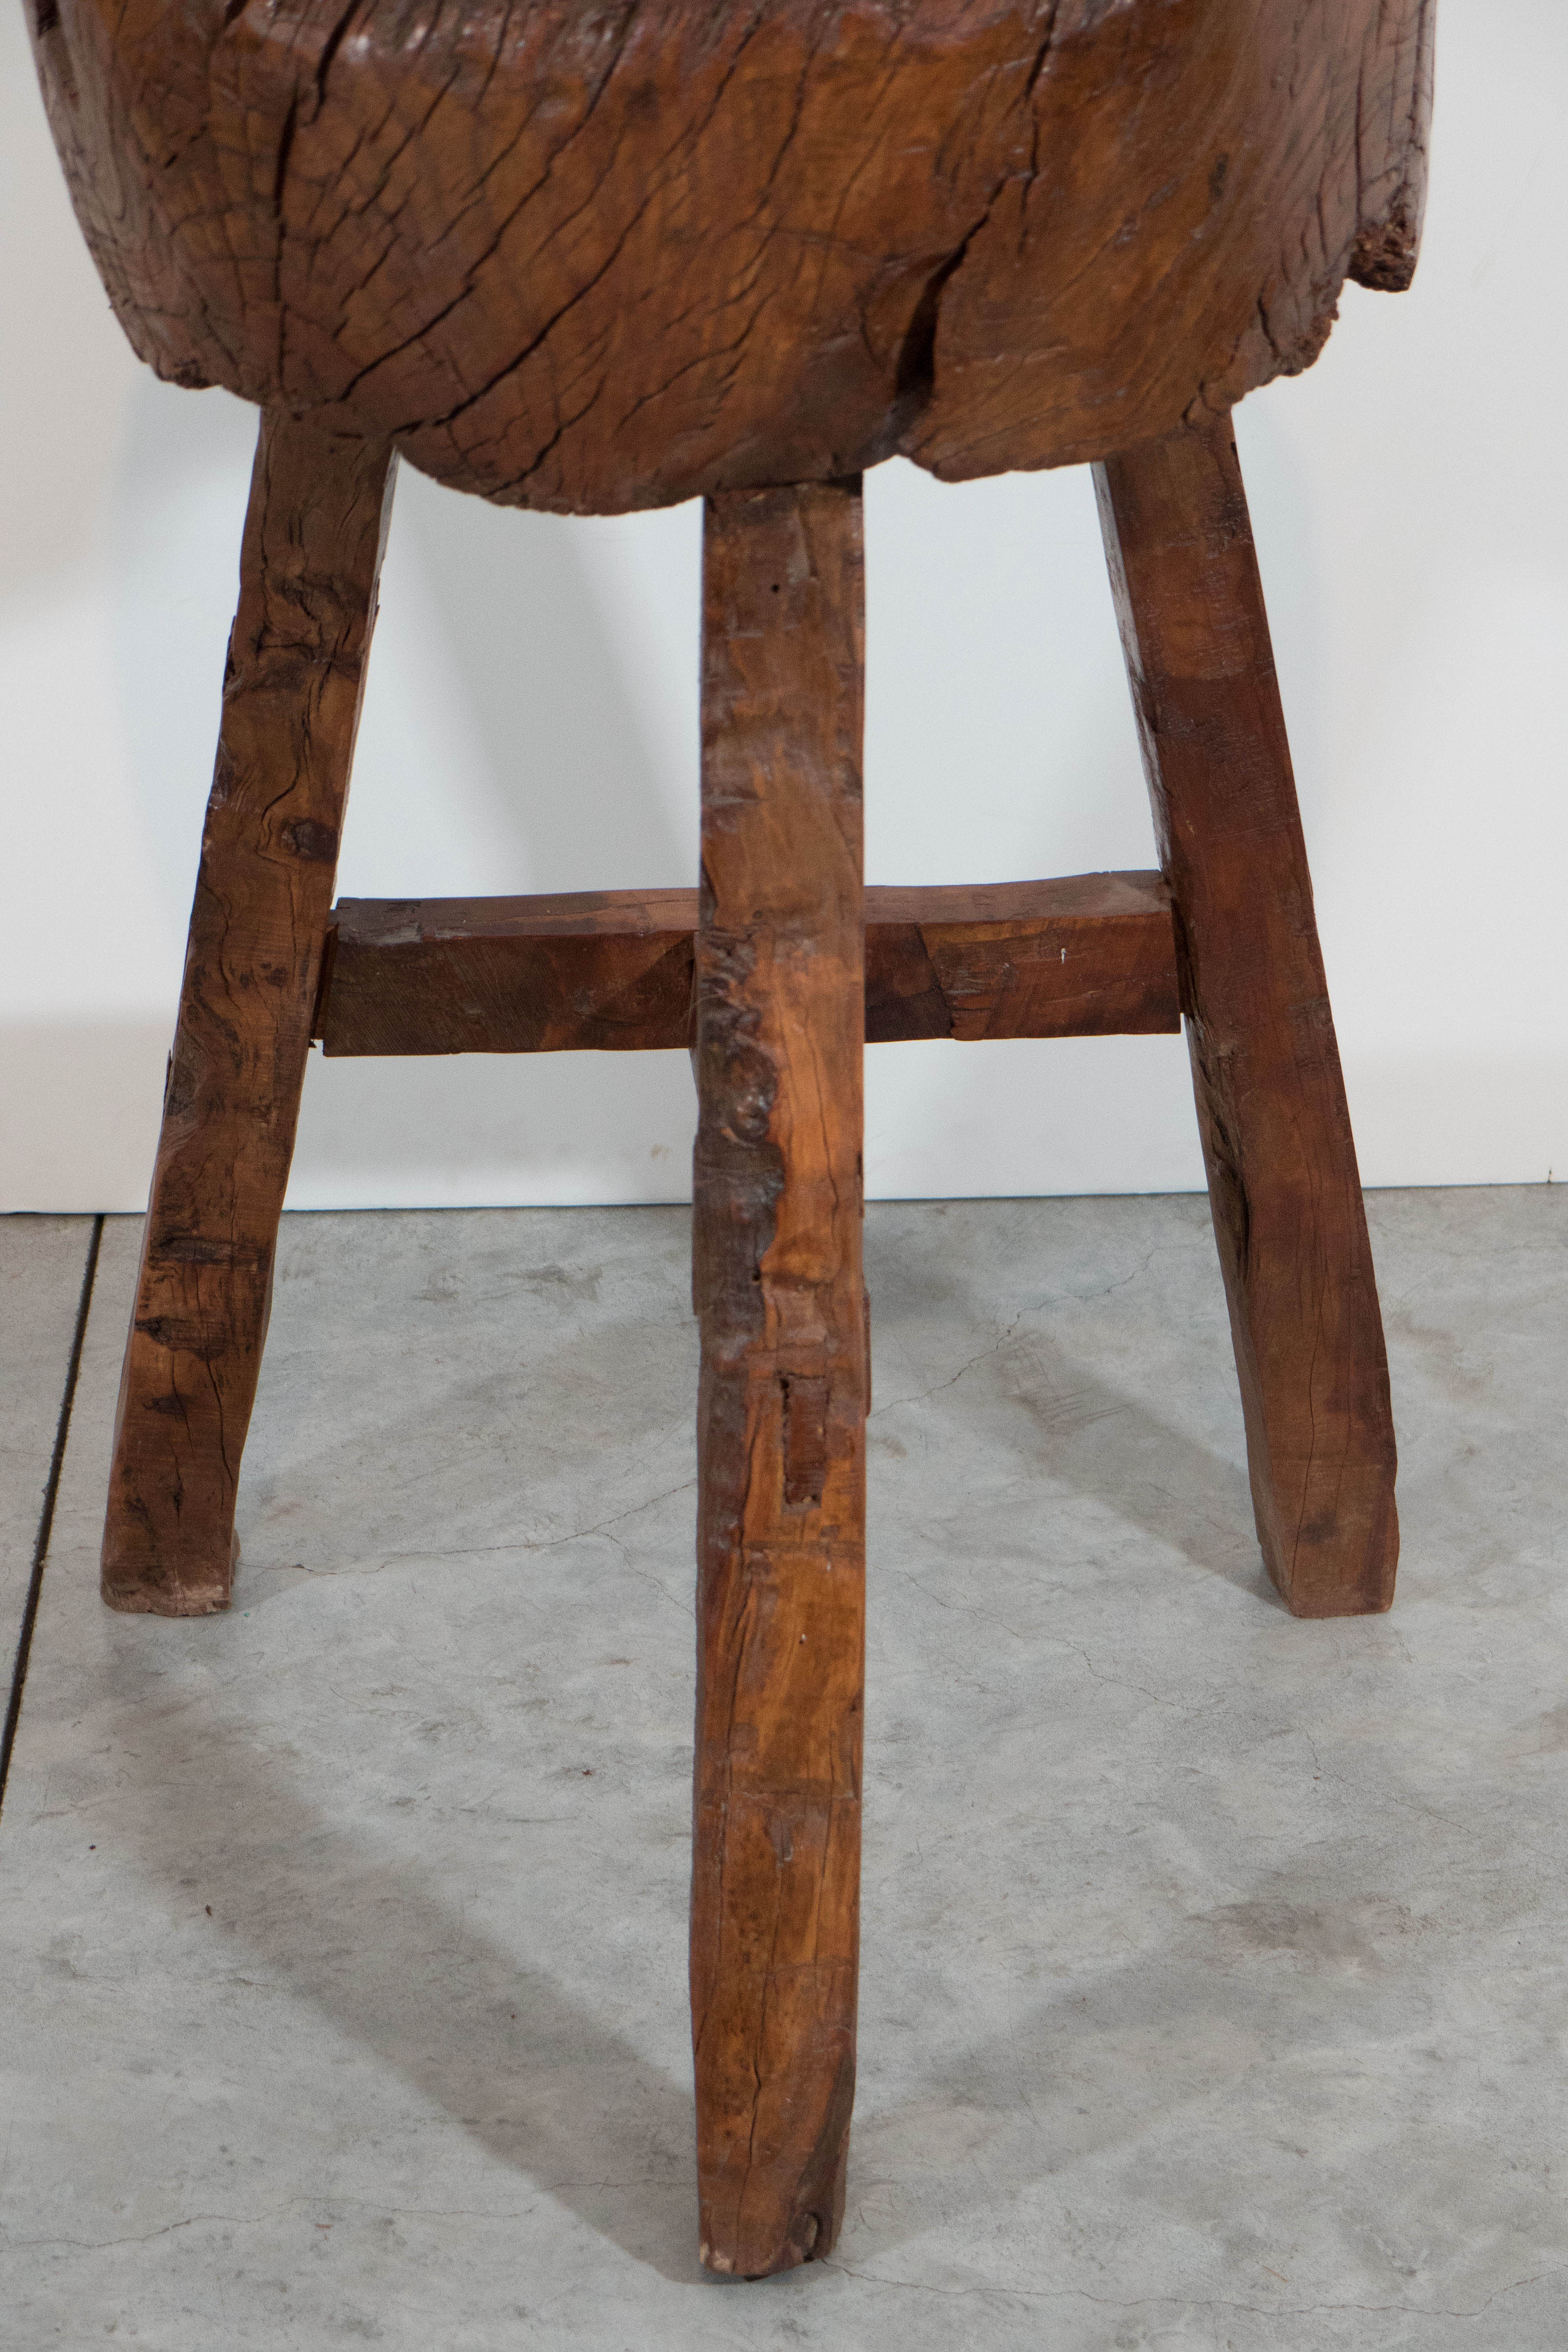 A striking, antique rustic butcher block from Shandong Province, China. Formerly used in an outdoor market, this would make an interesting stand, side table or stool.  
S345